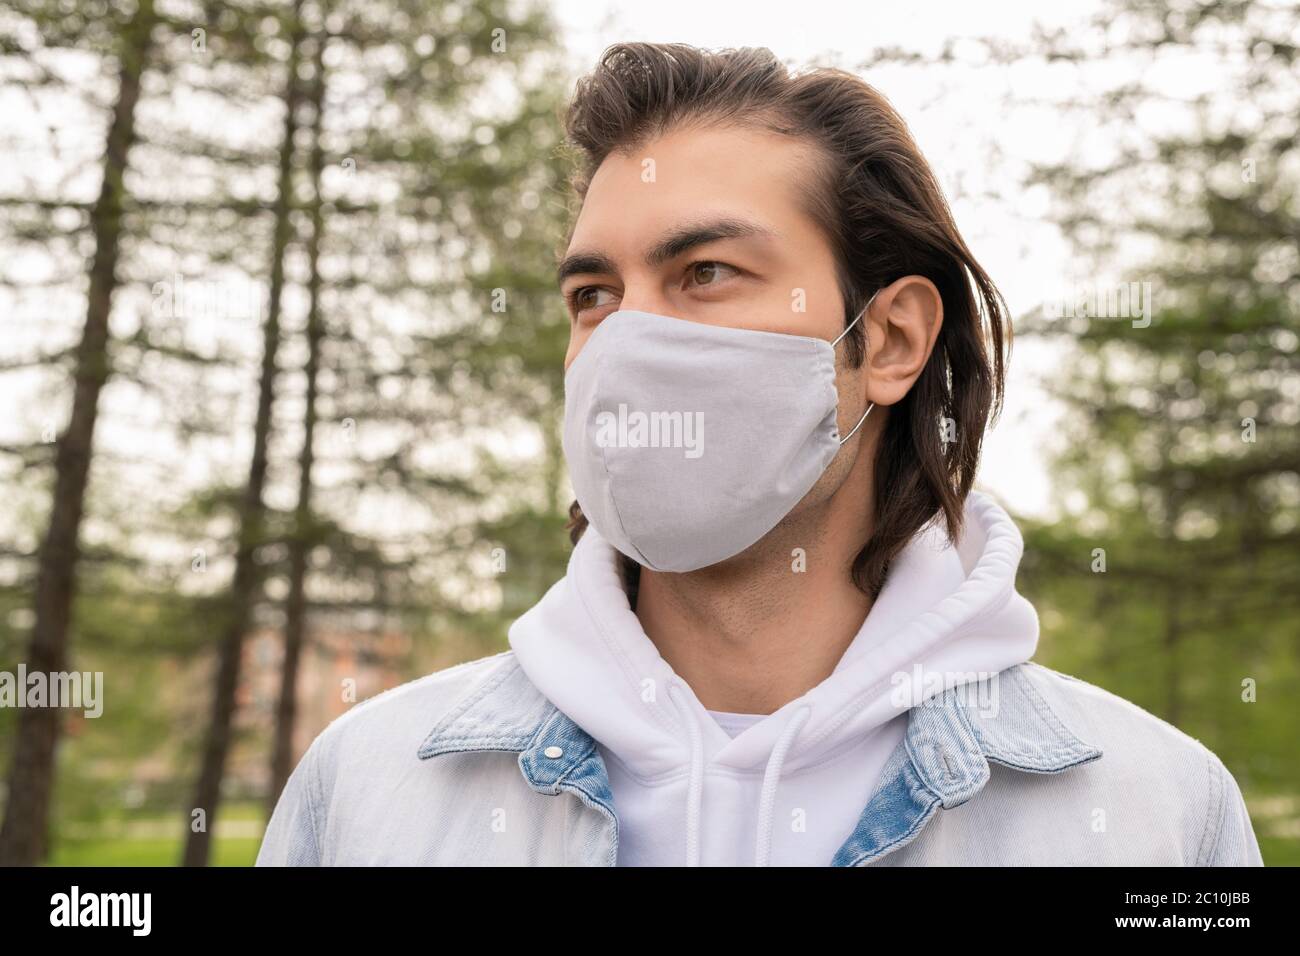 Handsome middle-aged man in cloth mask looking around while walking in forest during coronavirus pandemic Stock Photo